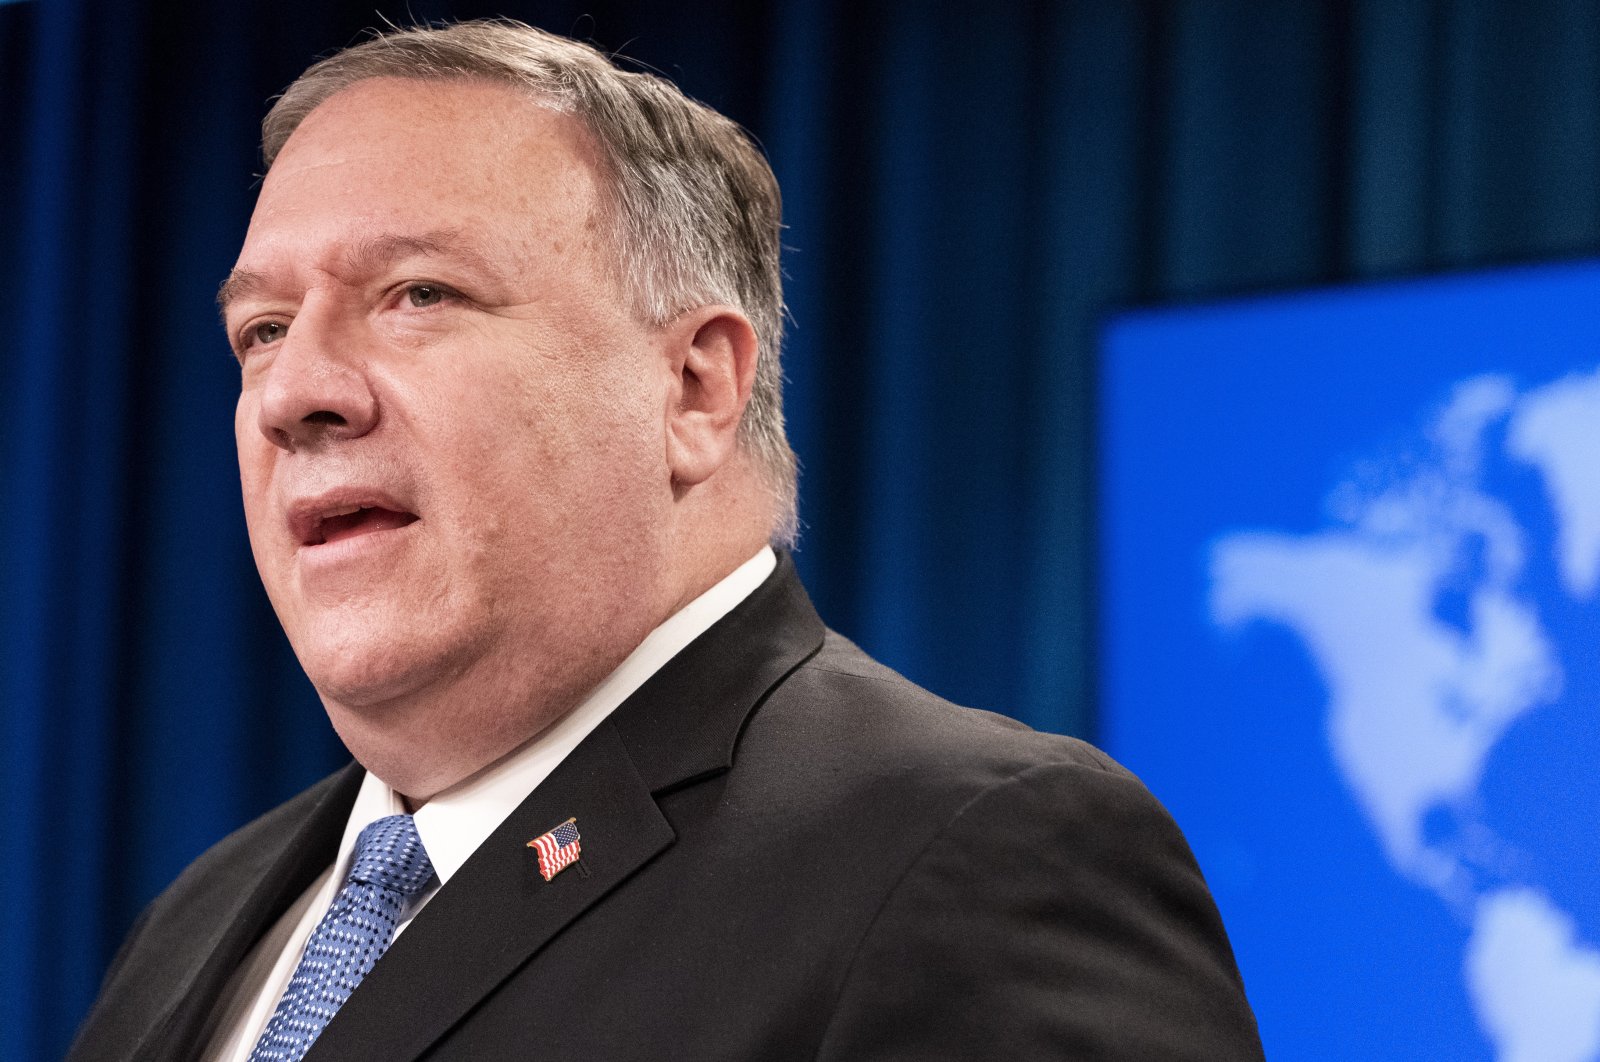 Secretary of State Mike Pompeo speaks during a media briefing at the State Department in Washington, D.C., U.S., Nov. 10, 2020. (AP Photo)